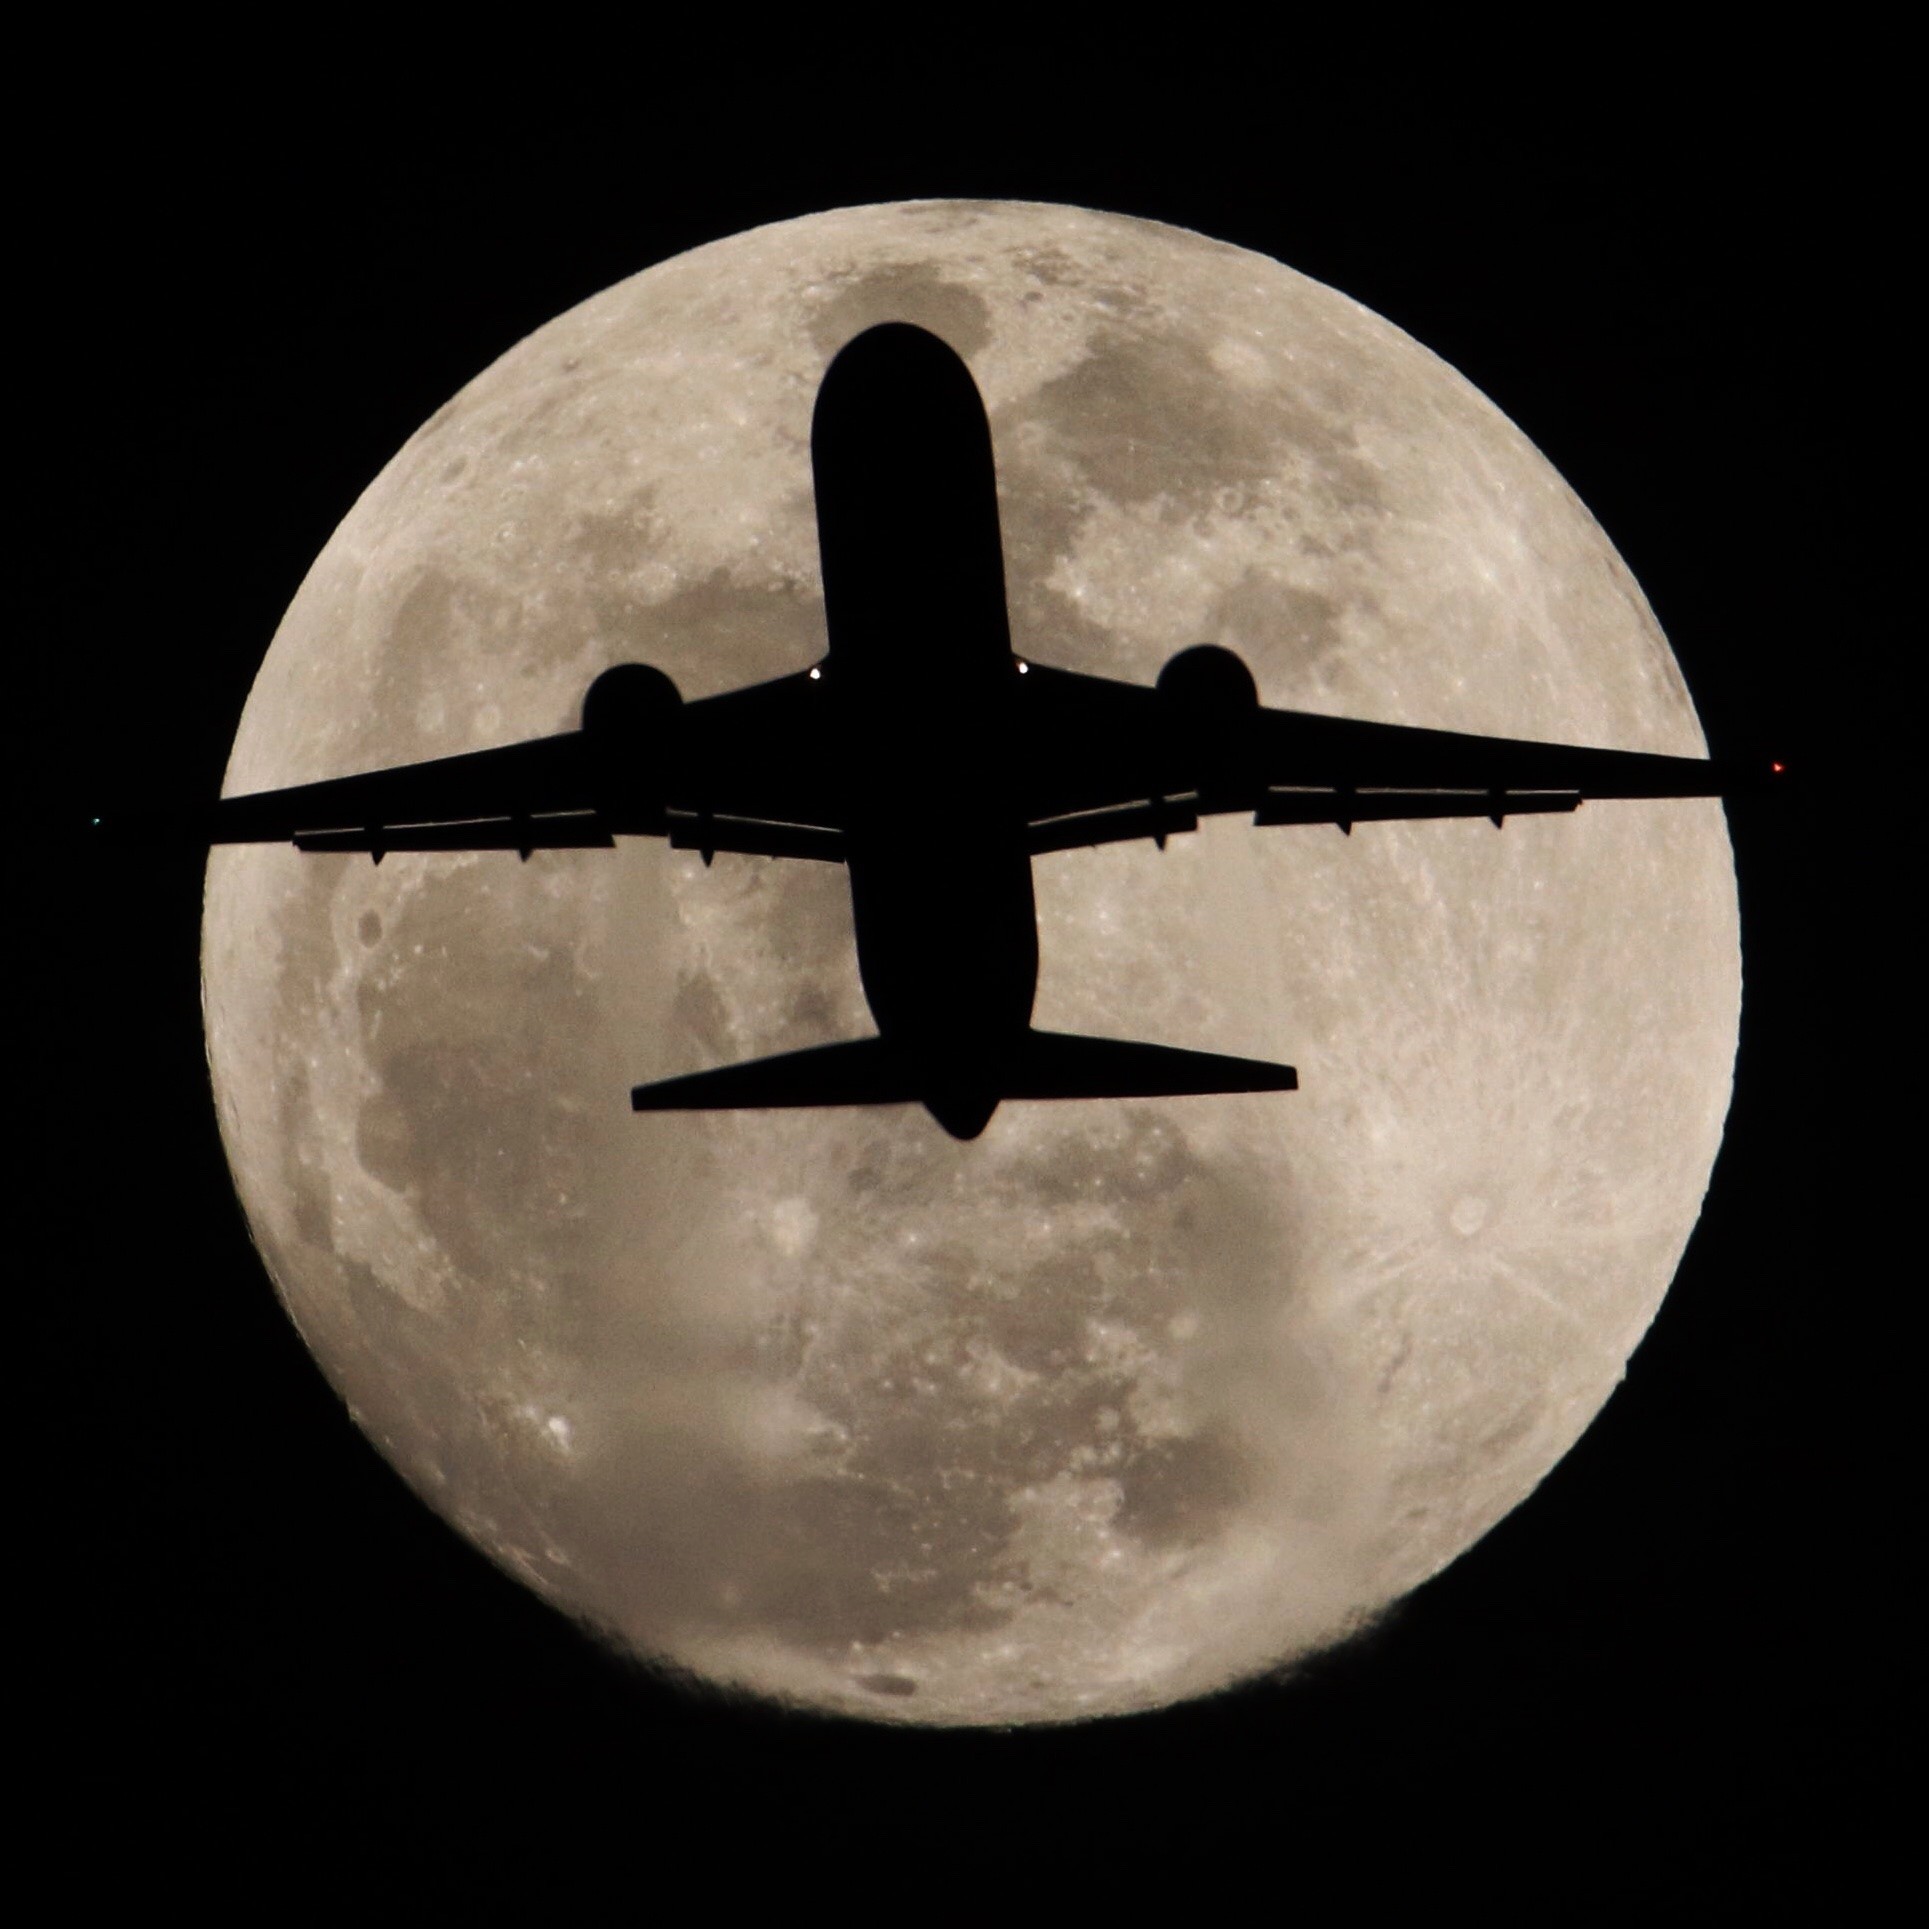 Jan. 30, 2018: Airliner crosses in front of full moon over Whittier, California, Tuesday evening. Th